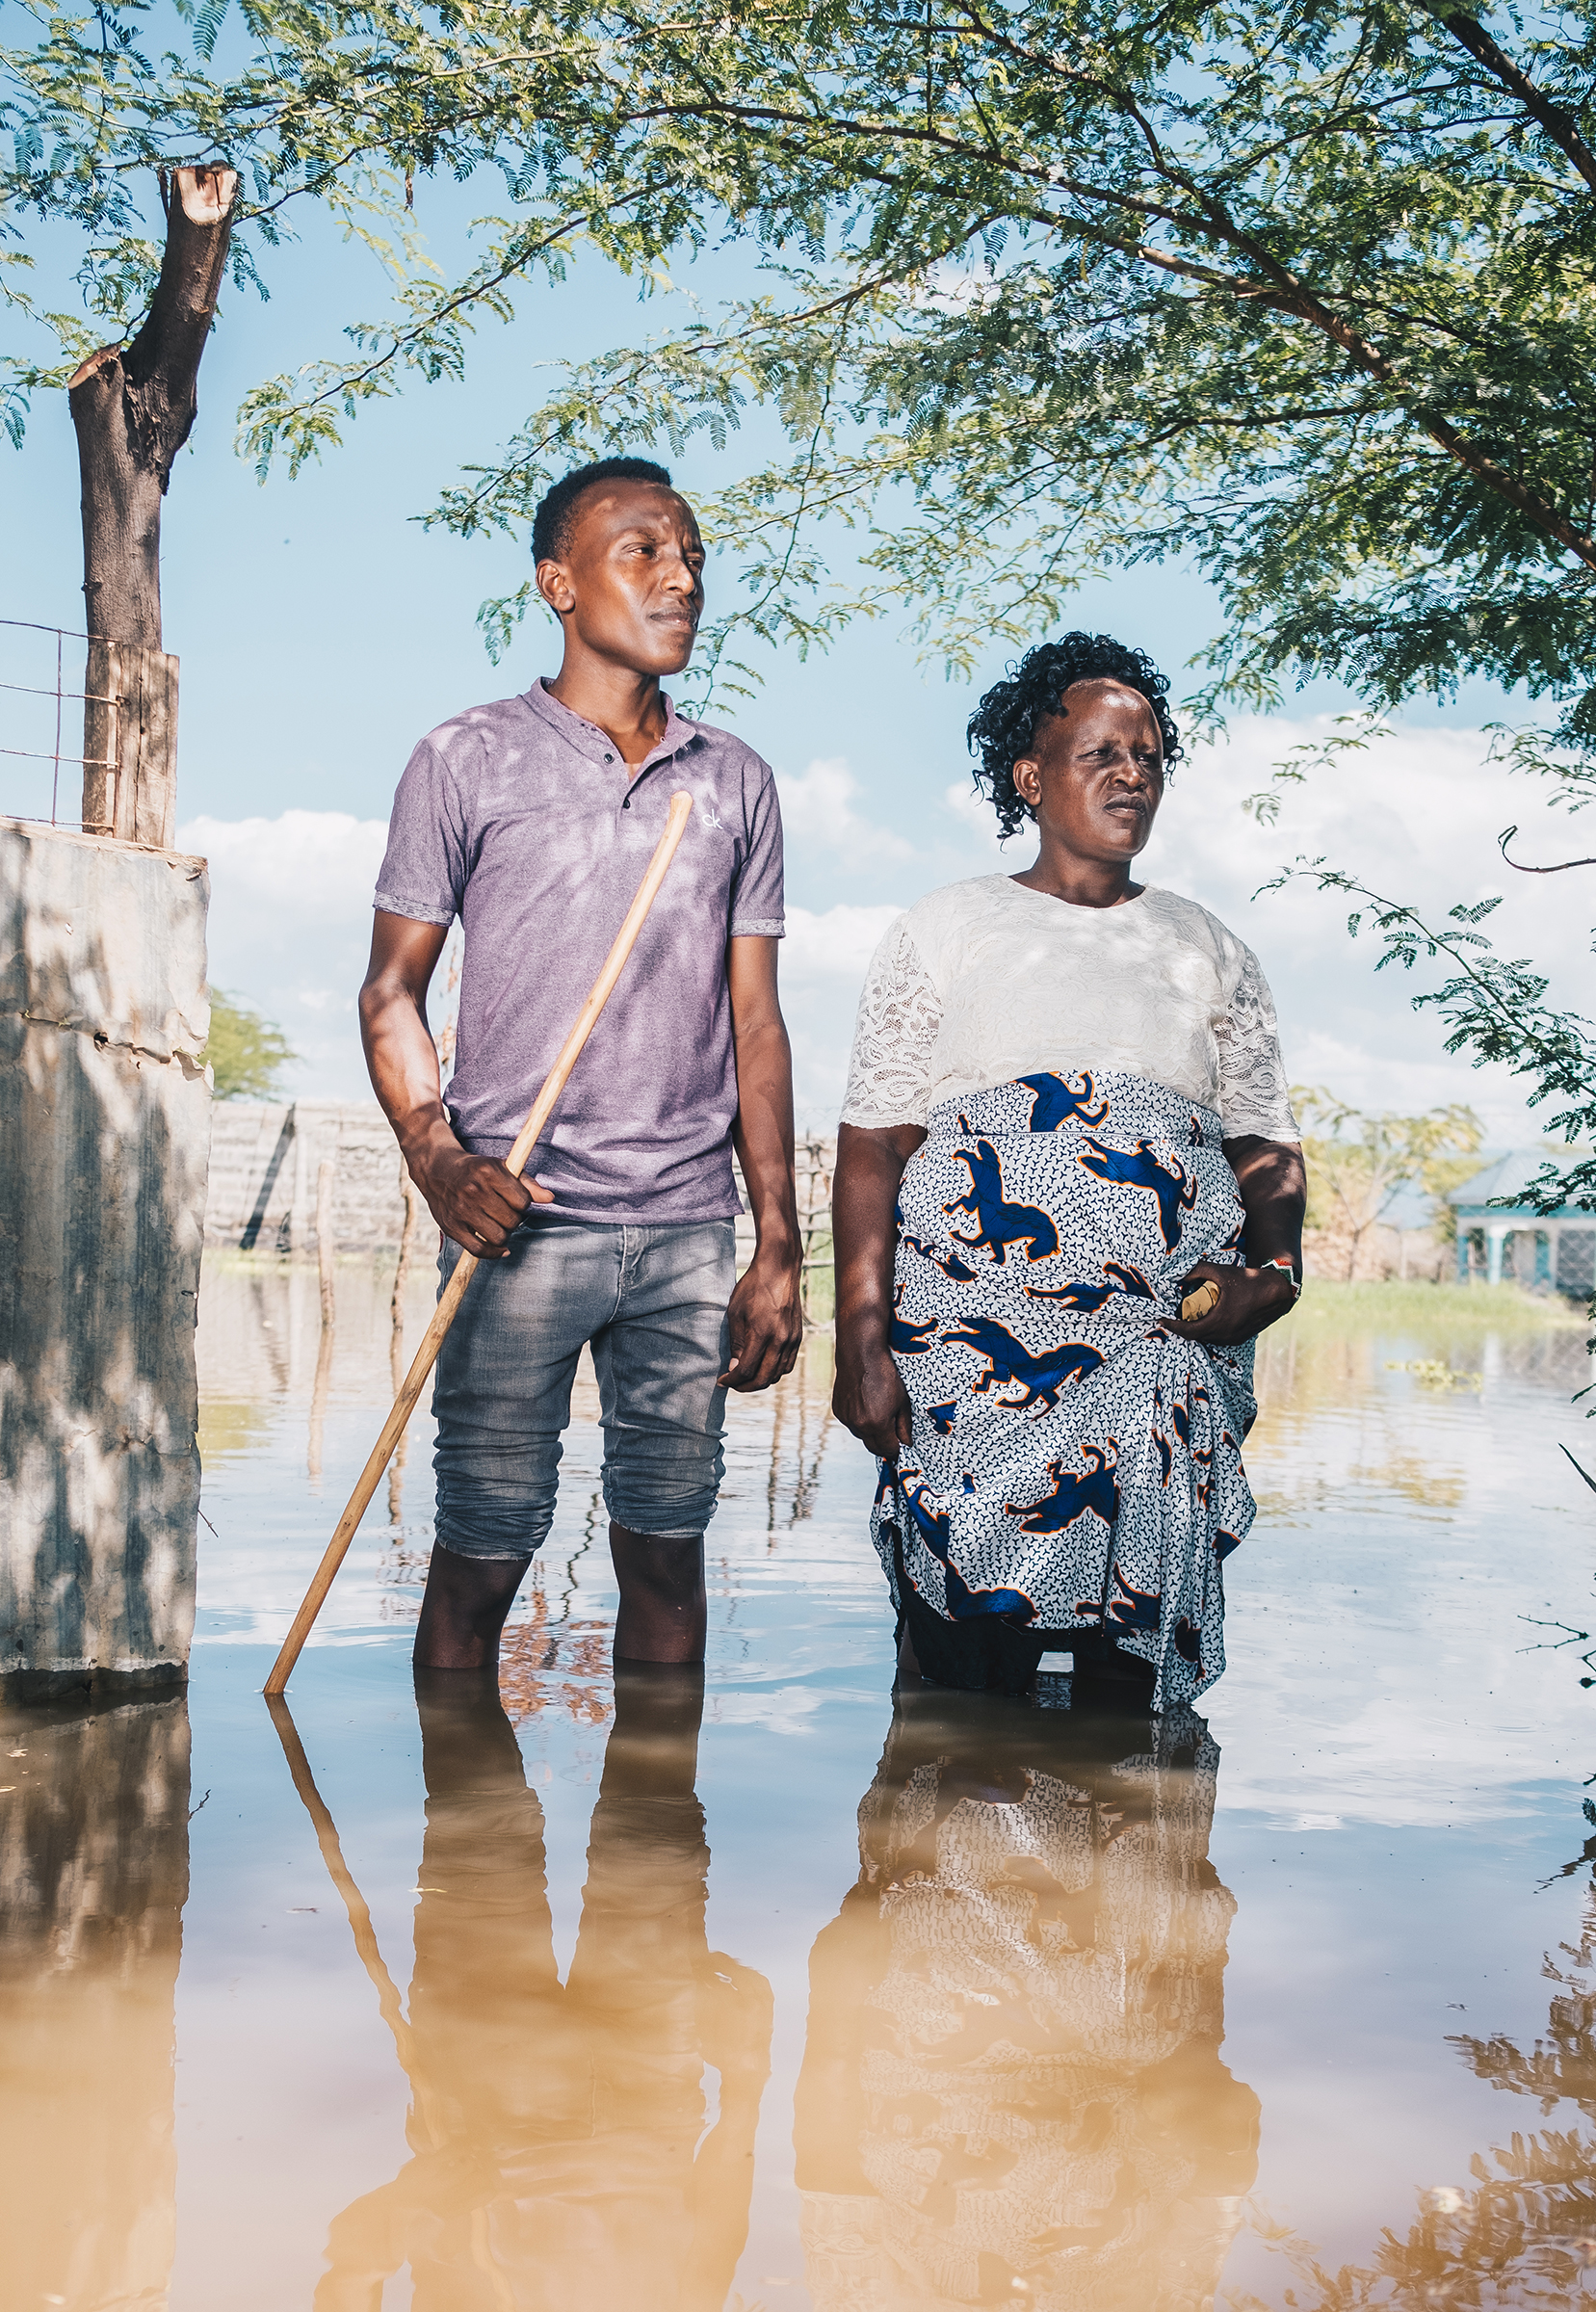 Festus and Veronica Parkolwa stand at the entrance of their former home by Lake Baringo in November. (Khadija M. Farah for TIME)